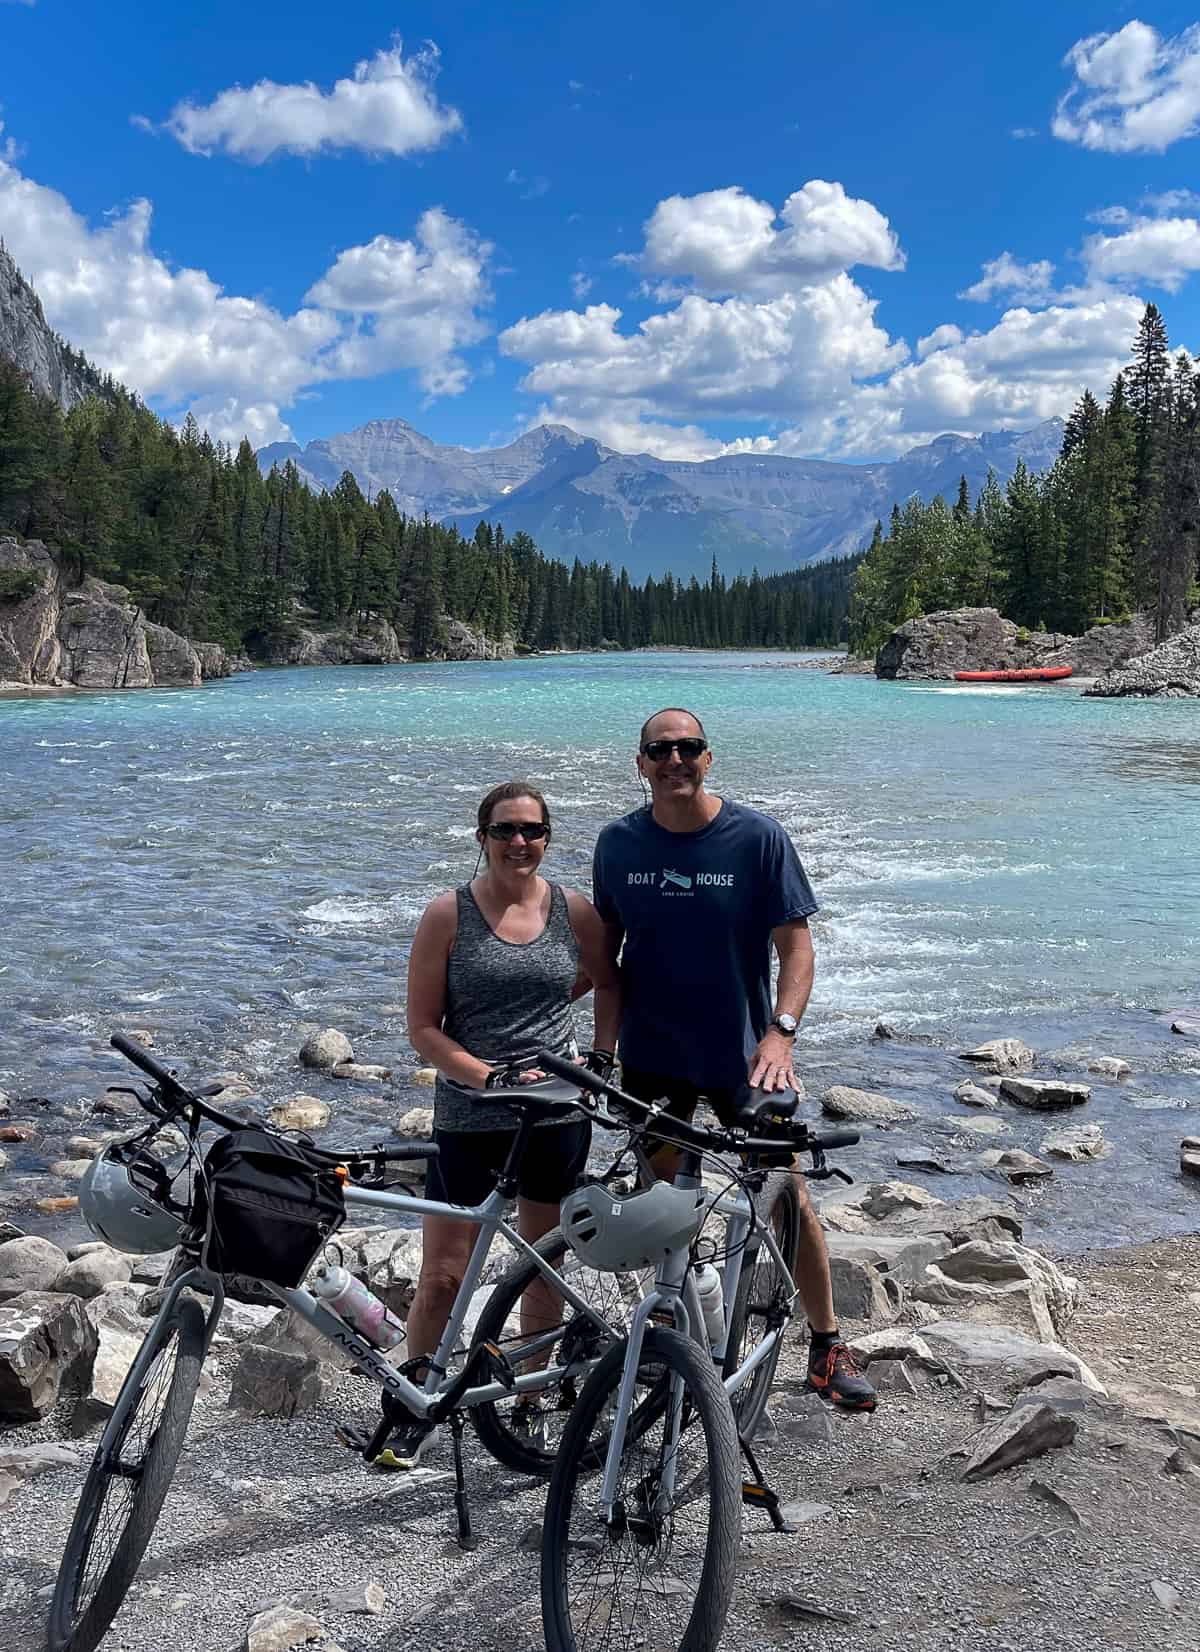 Mike and I by our bikes on Bow Valley Creek.